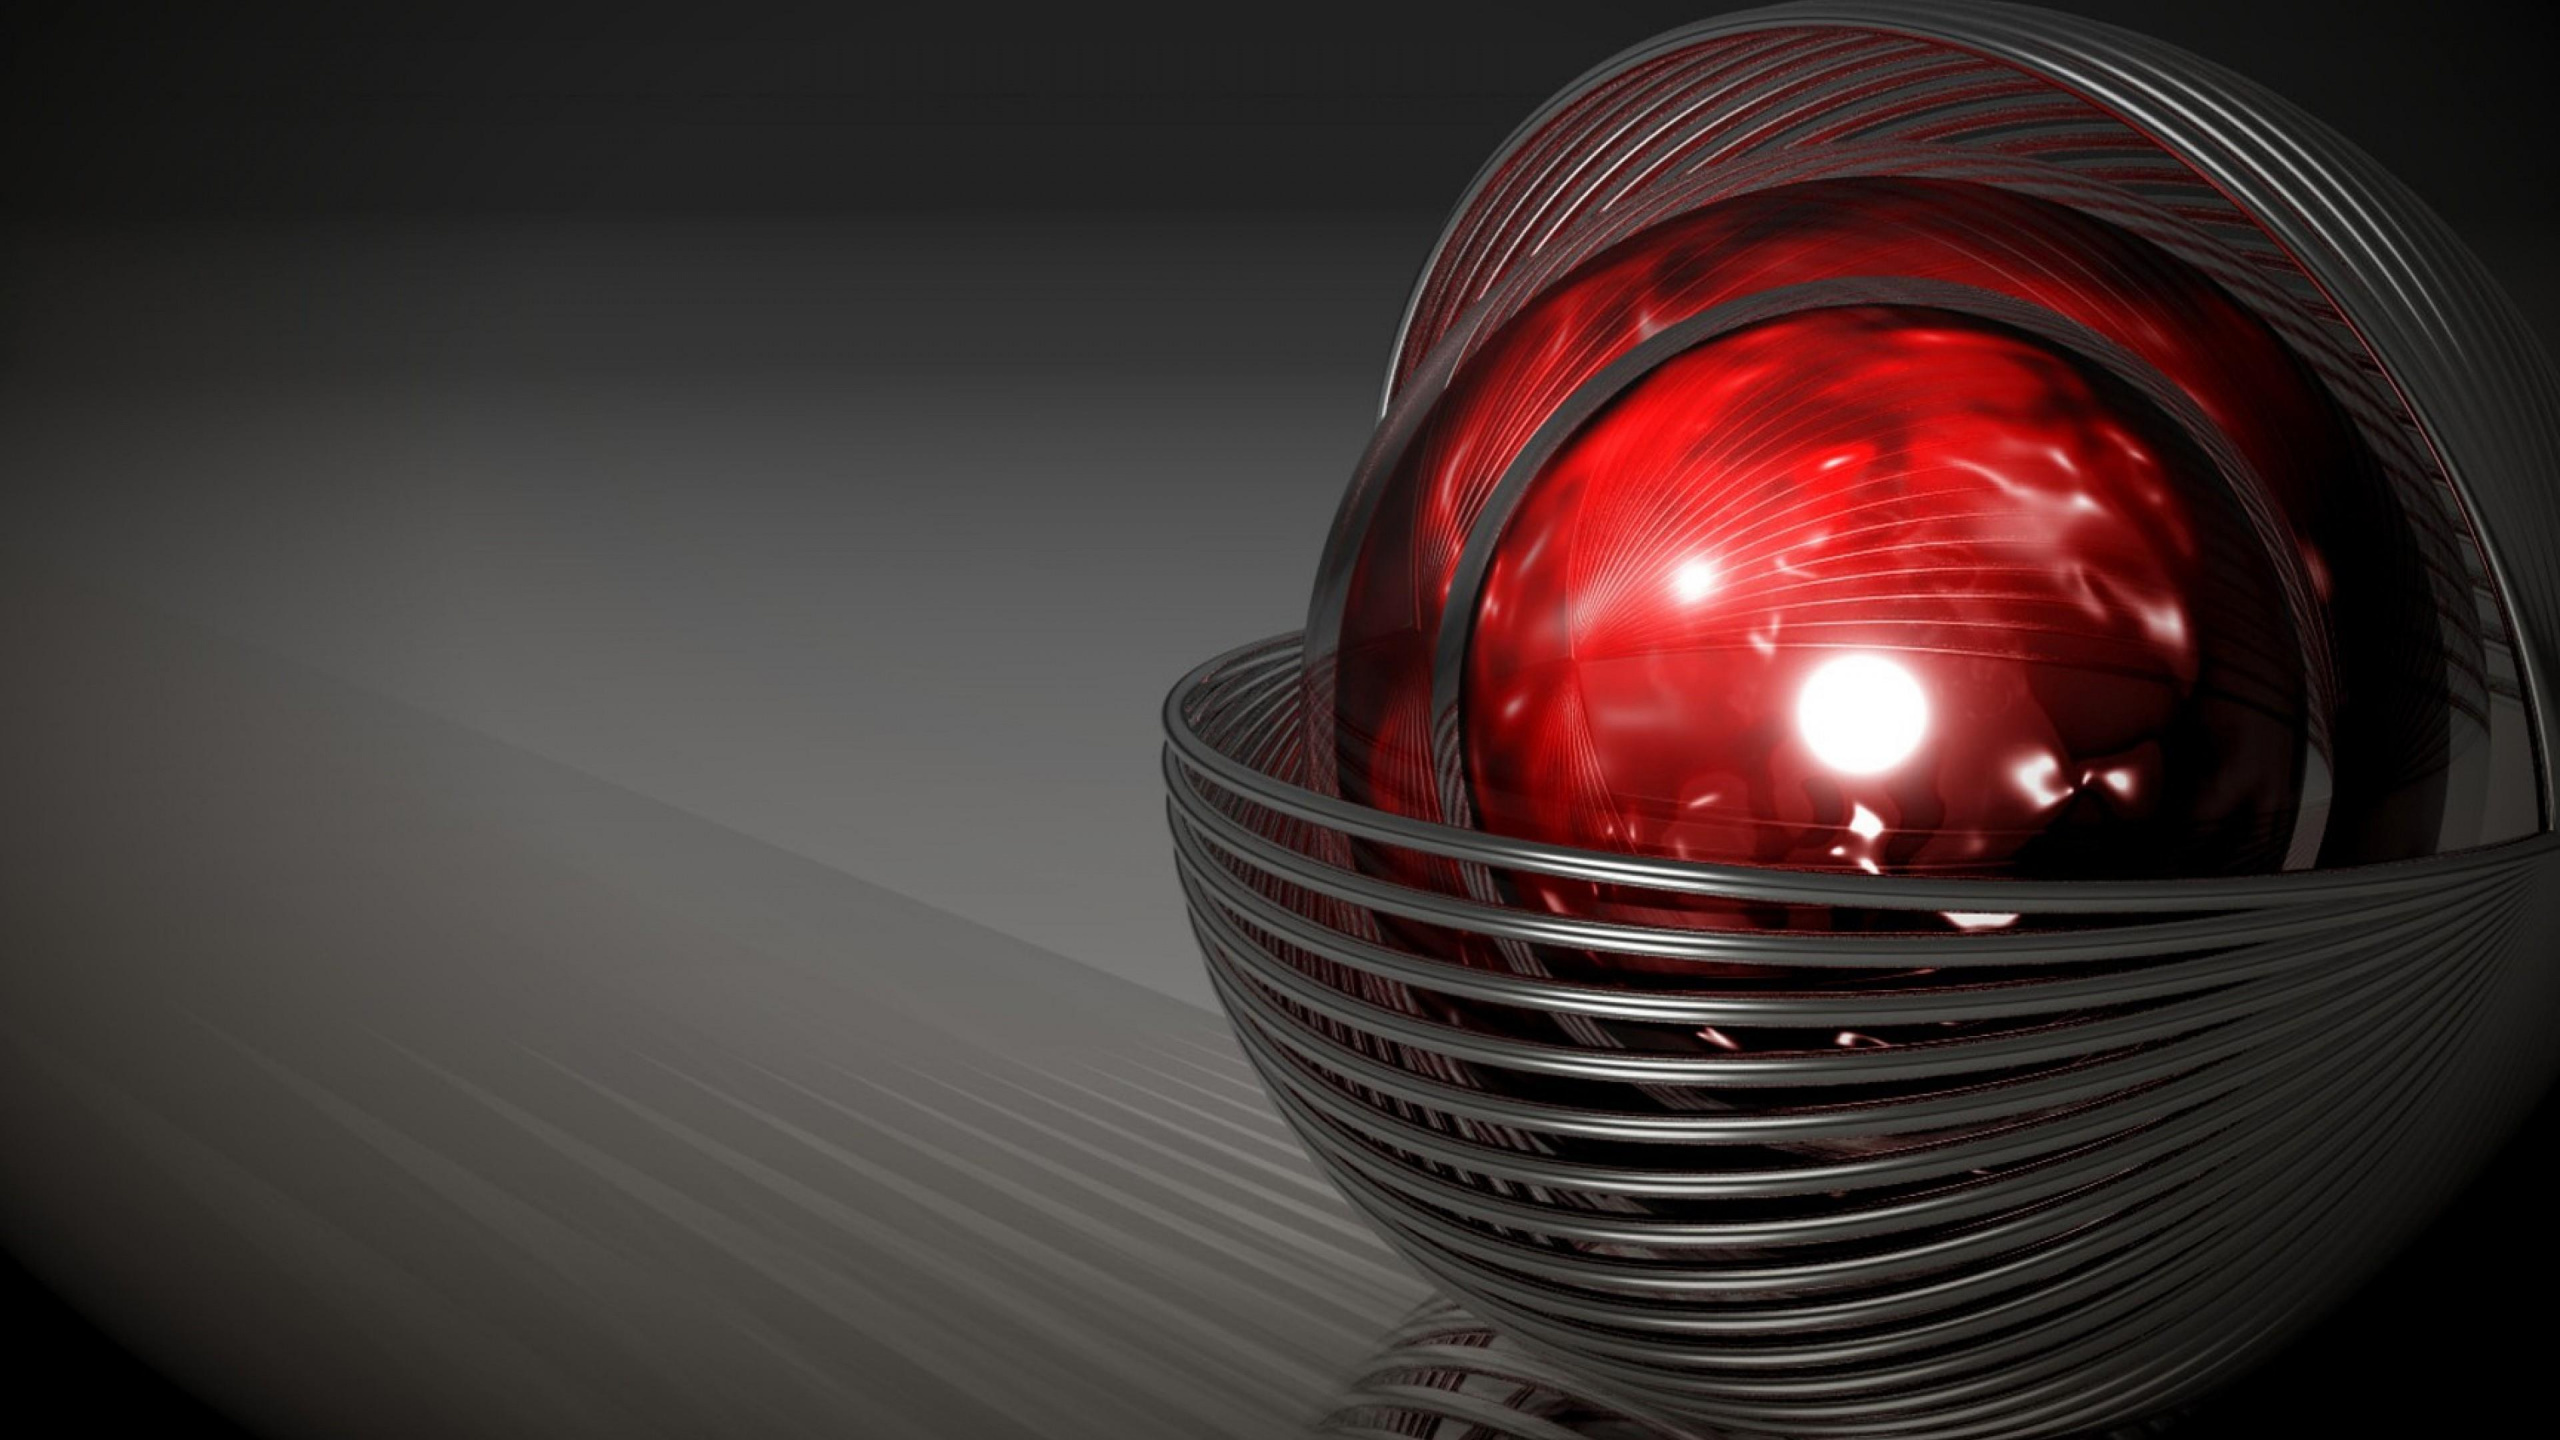 Red and Black Round Light. Wallpaper in 2560x1440 Resolution